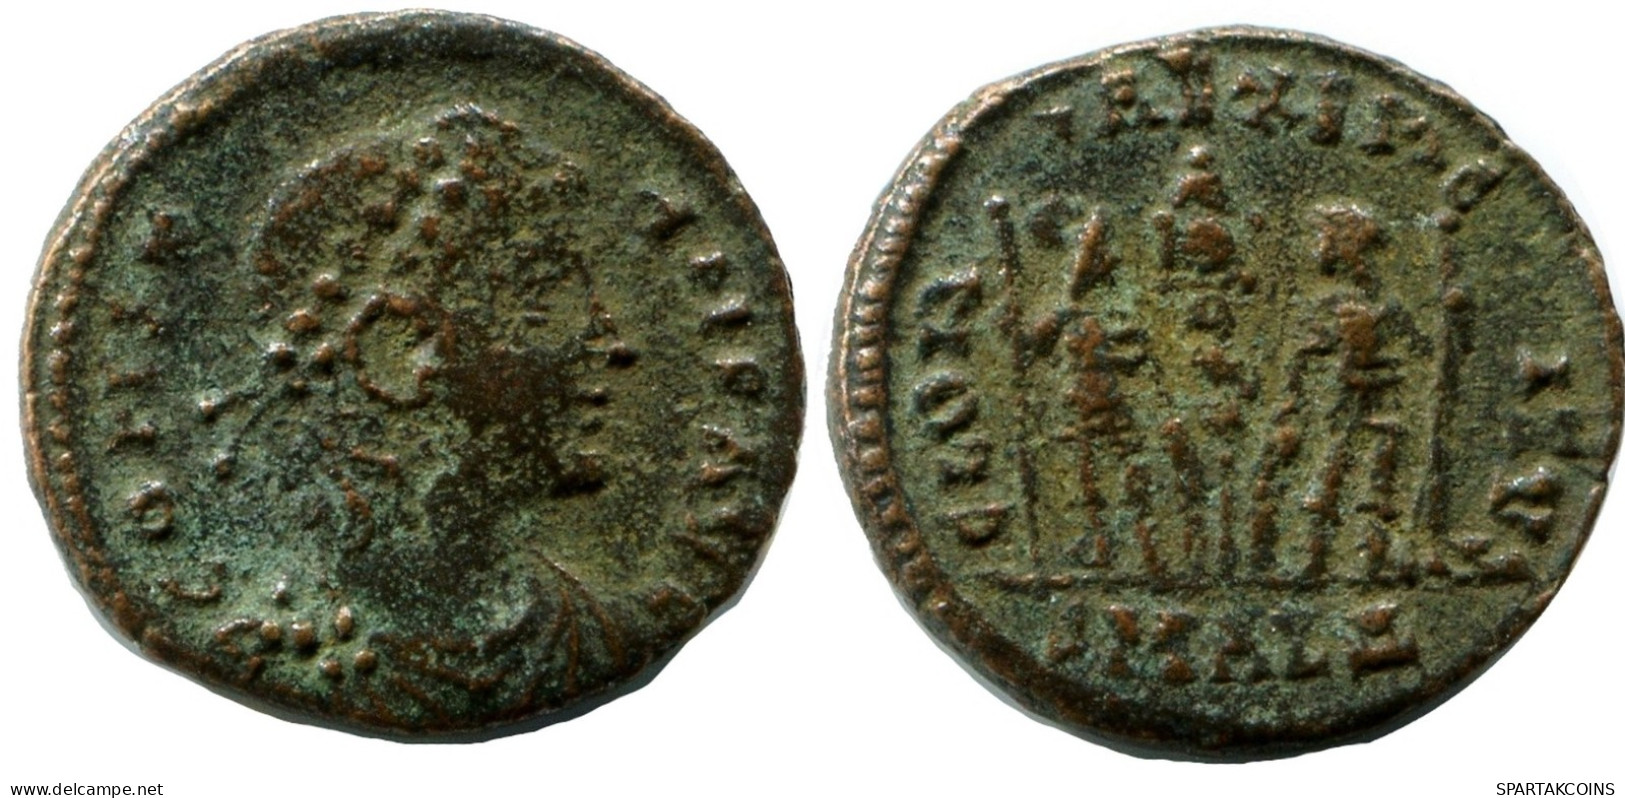 CONSTANS MINTED IN ALEKSANDRIA FROM THE ROYAL ONTARIO MUSEUM #ANC11448.14.E.A - The Christian Empire (307 AD To 363 AD)